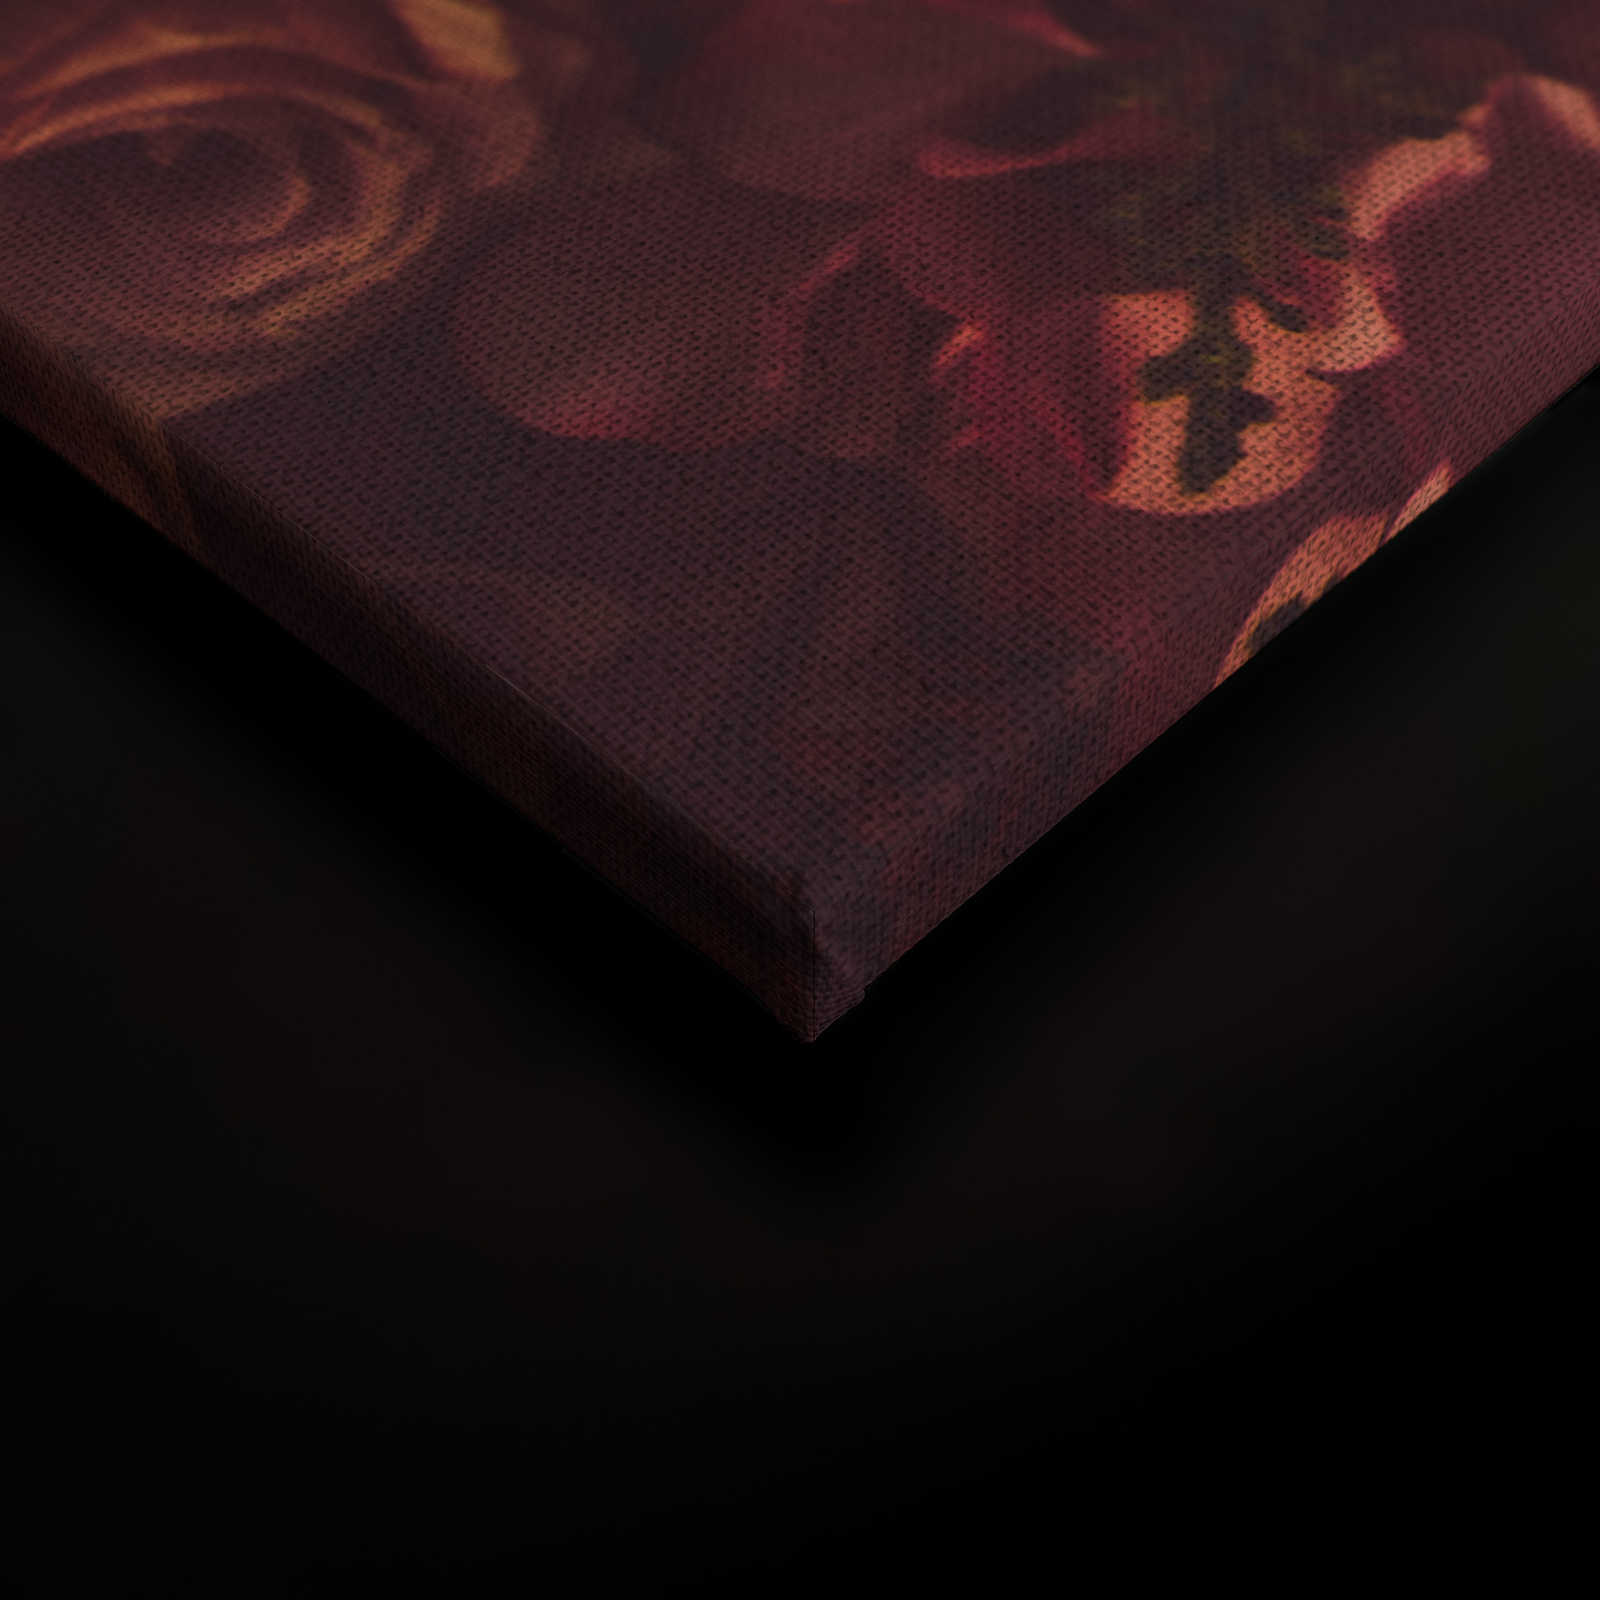             Canvas with romantic rose motif in linen look - 0.90 m x 0.60 m
        